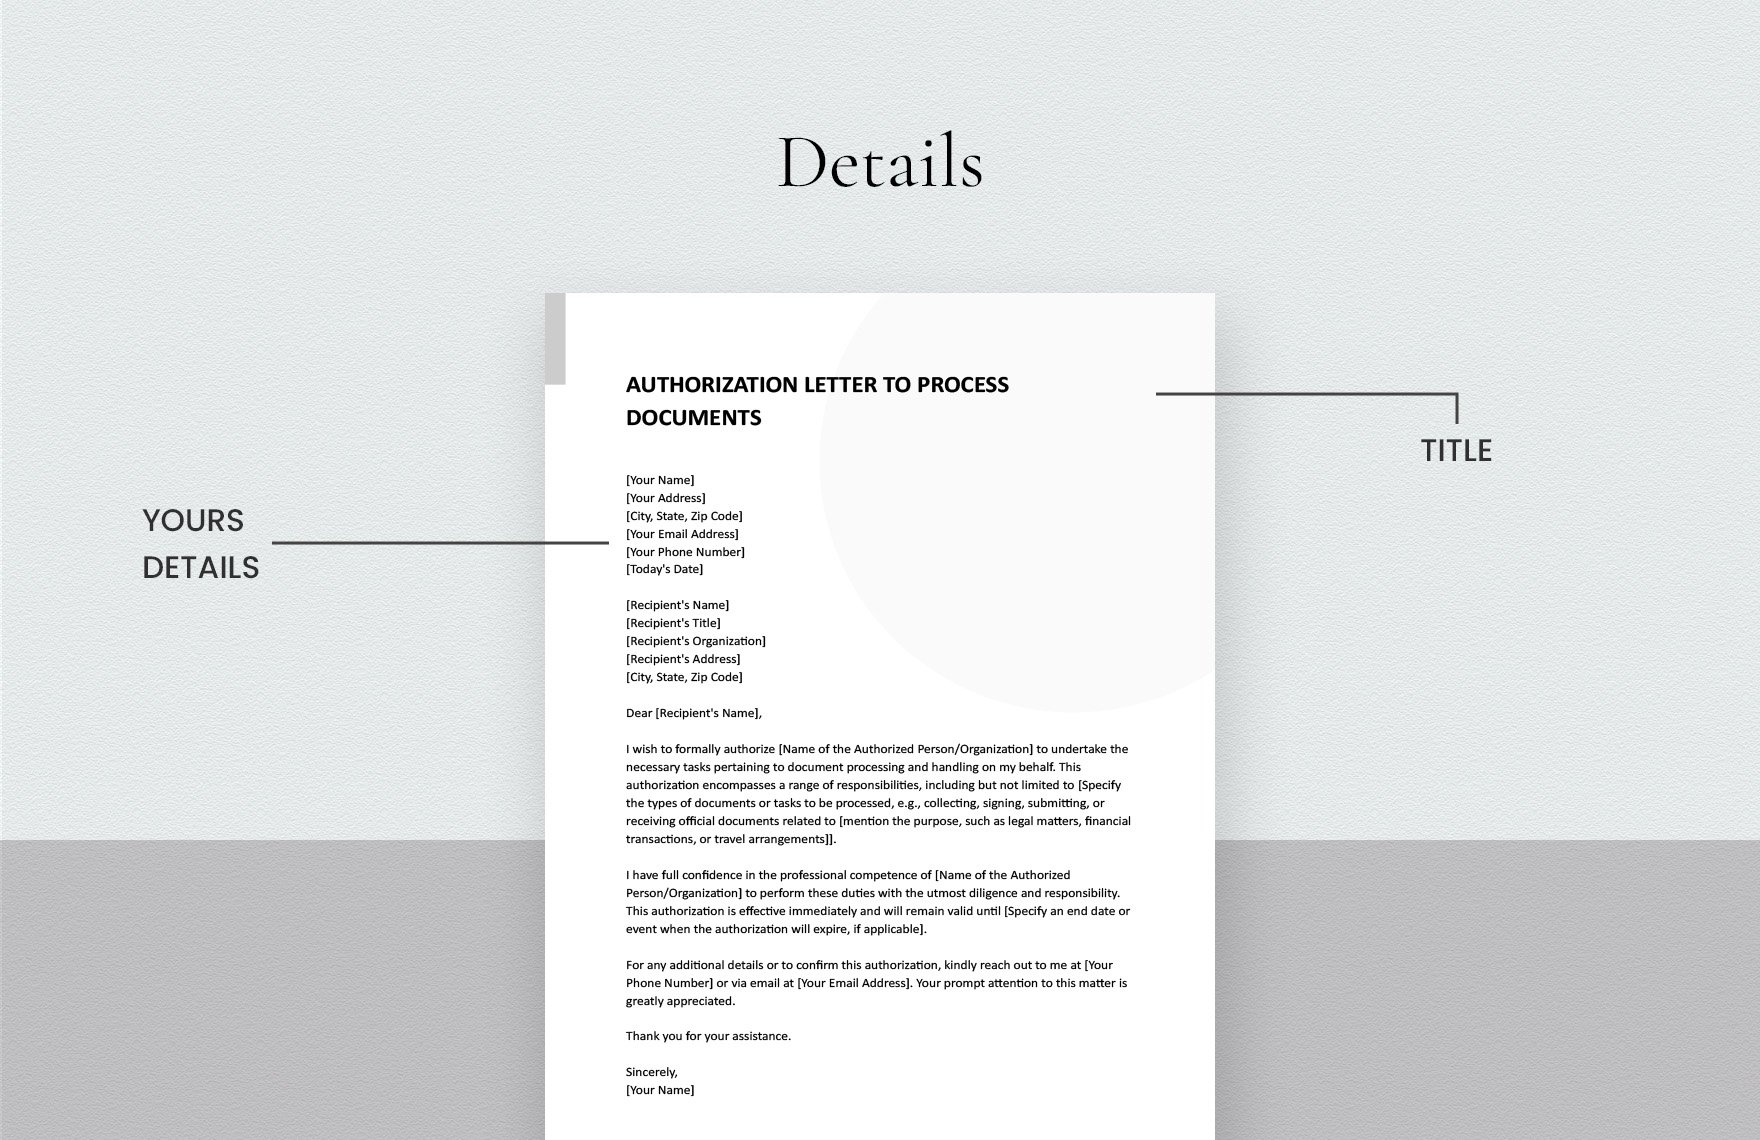 Authorization Letter To Process Documents